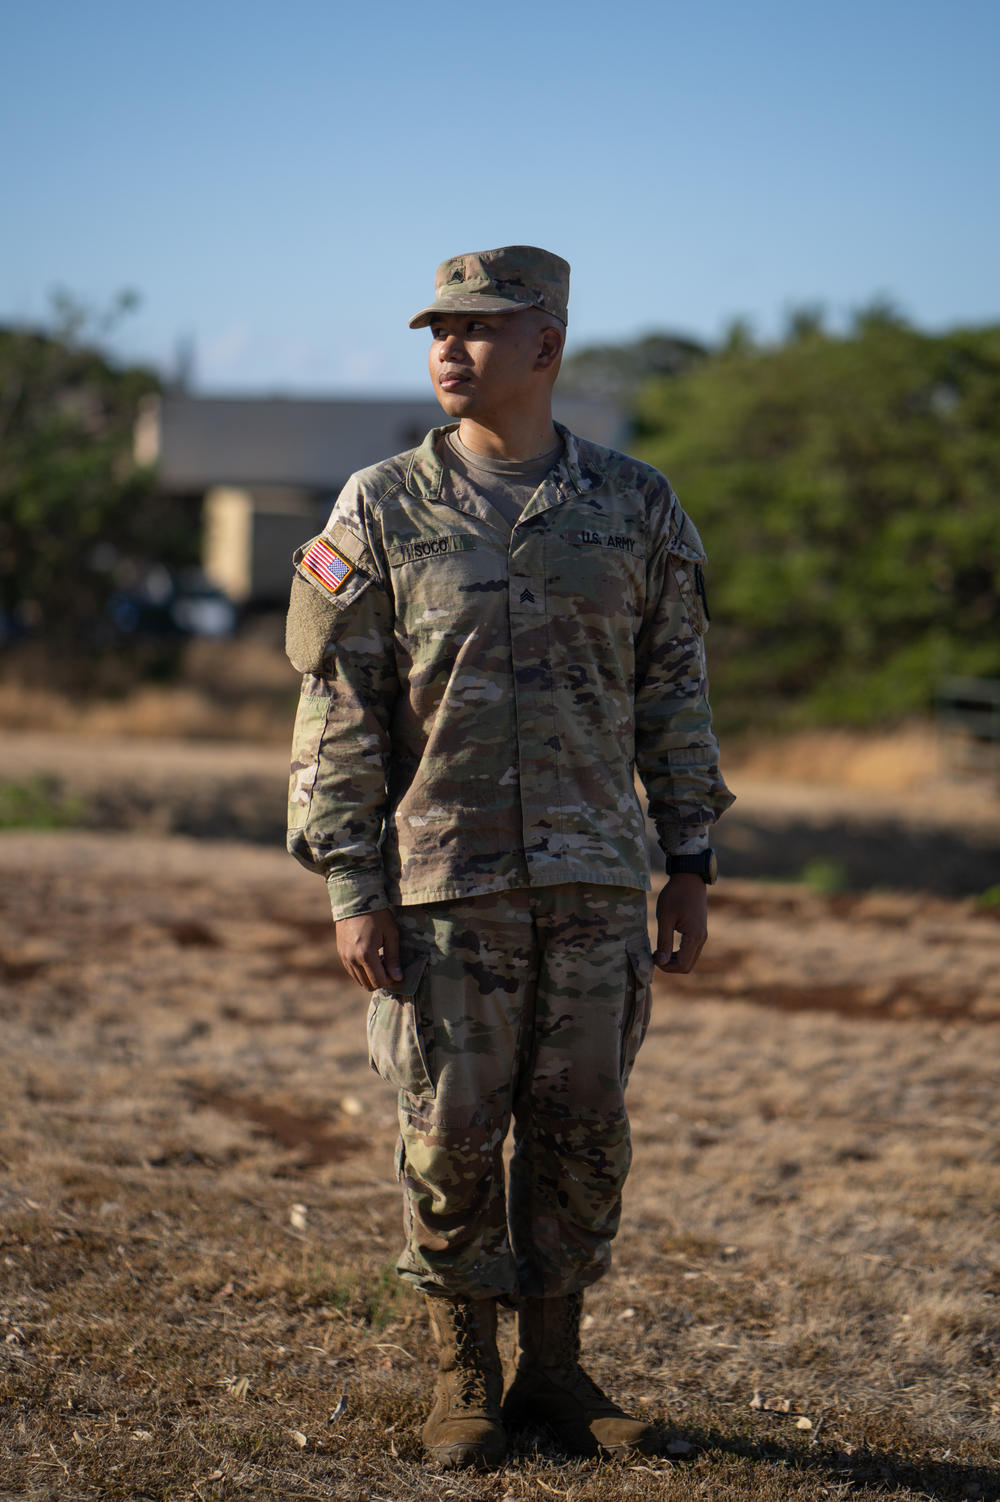 Sgt. Manuel Soco is part of the community of Lahaina, and has been there since the beginning helping with search and rescue efforts after the Lahaina fires.